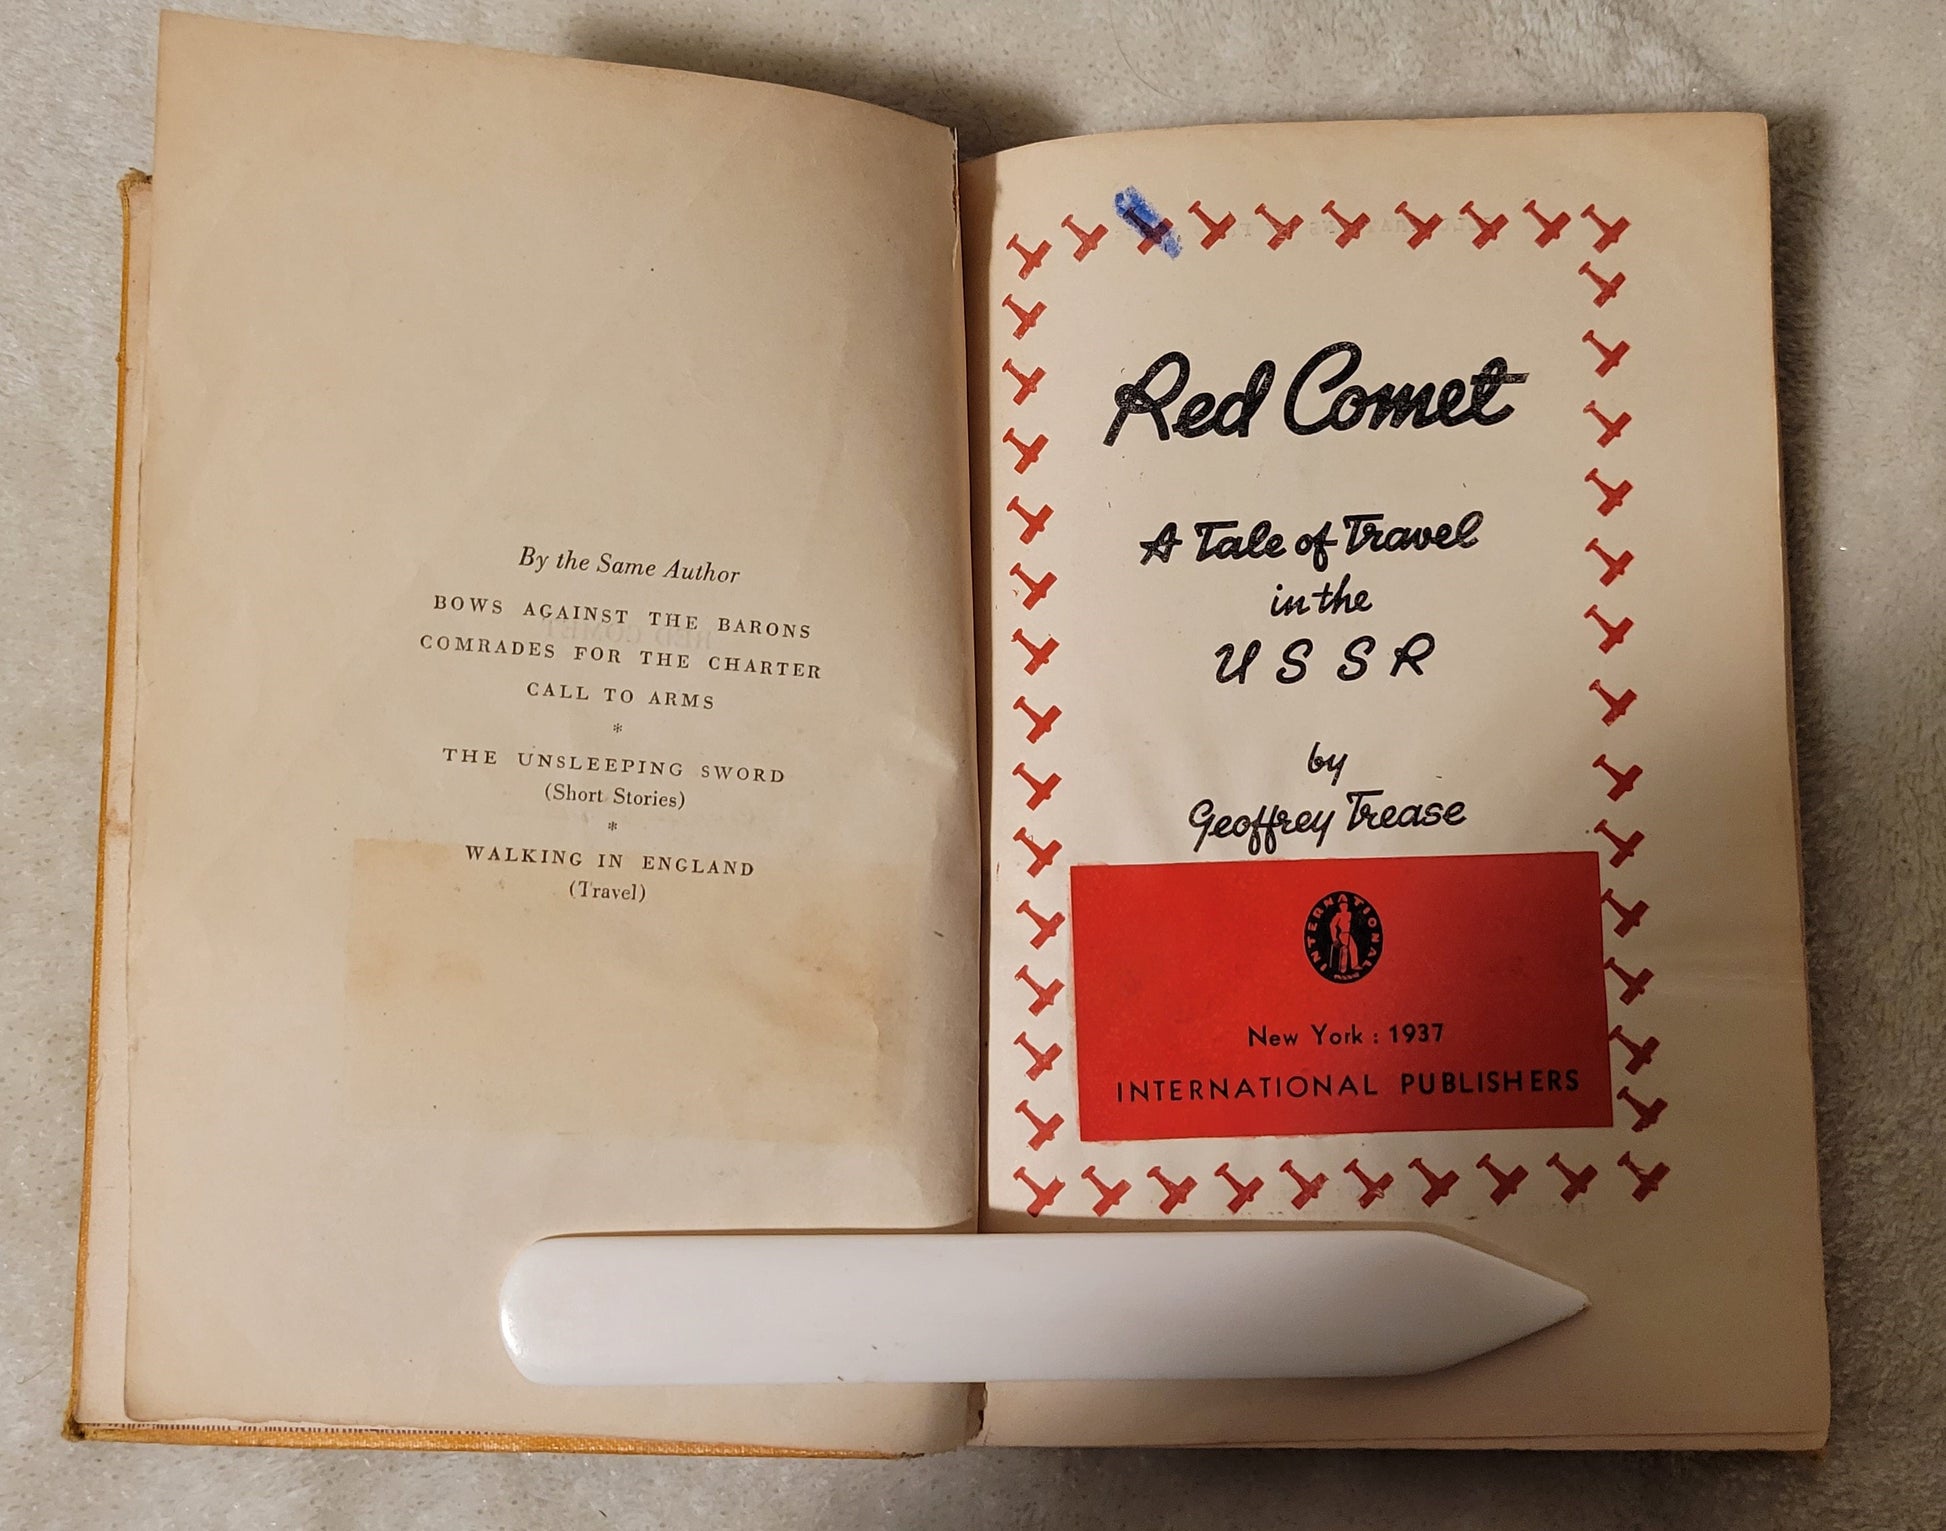 Vintage book for sale from the USSR, “Red Comet: A Tale of Travel in the USSR" written by British author Geoffrey Trease, published by International Publishers, 1937. View of title page.